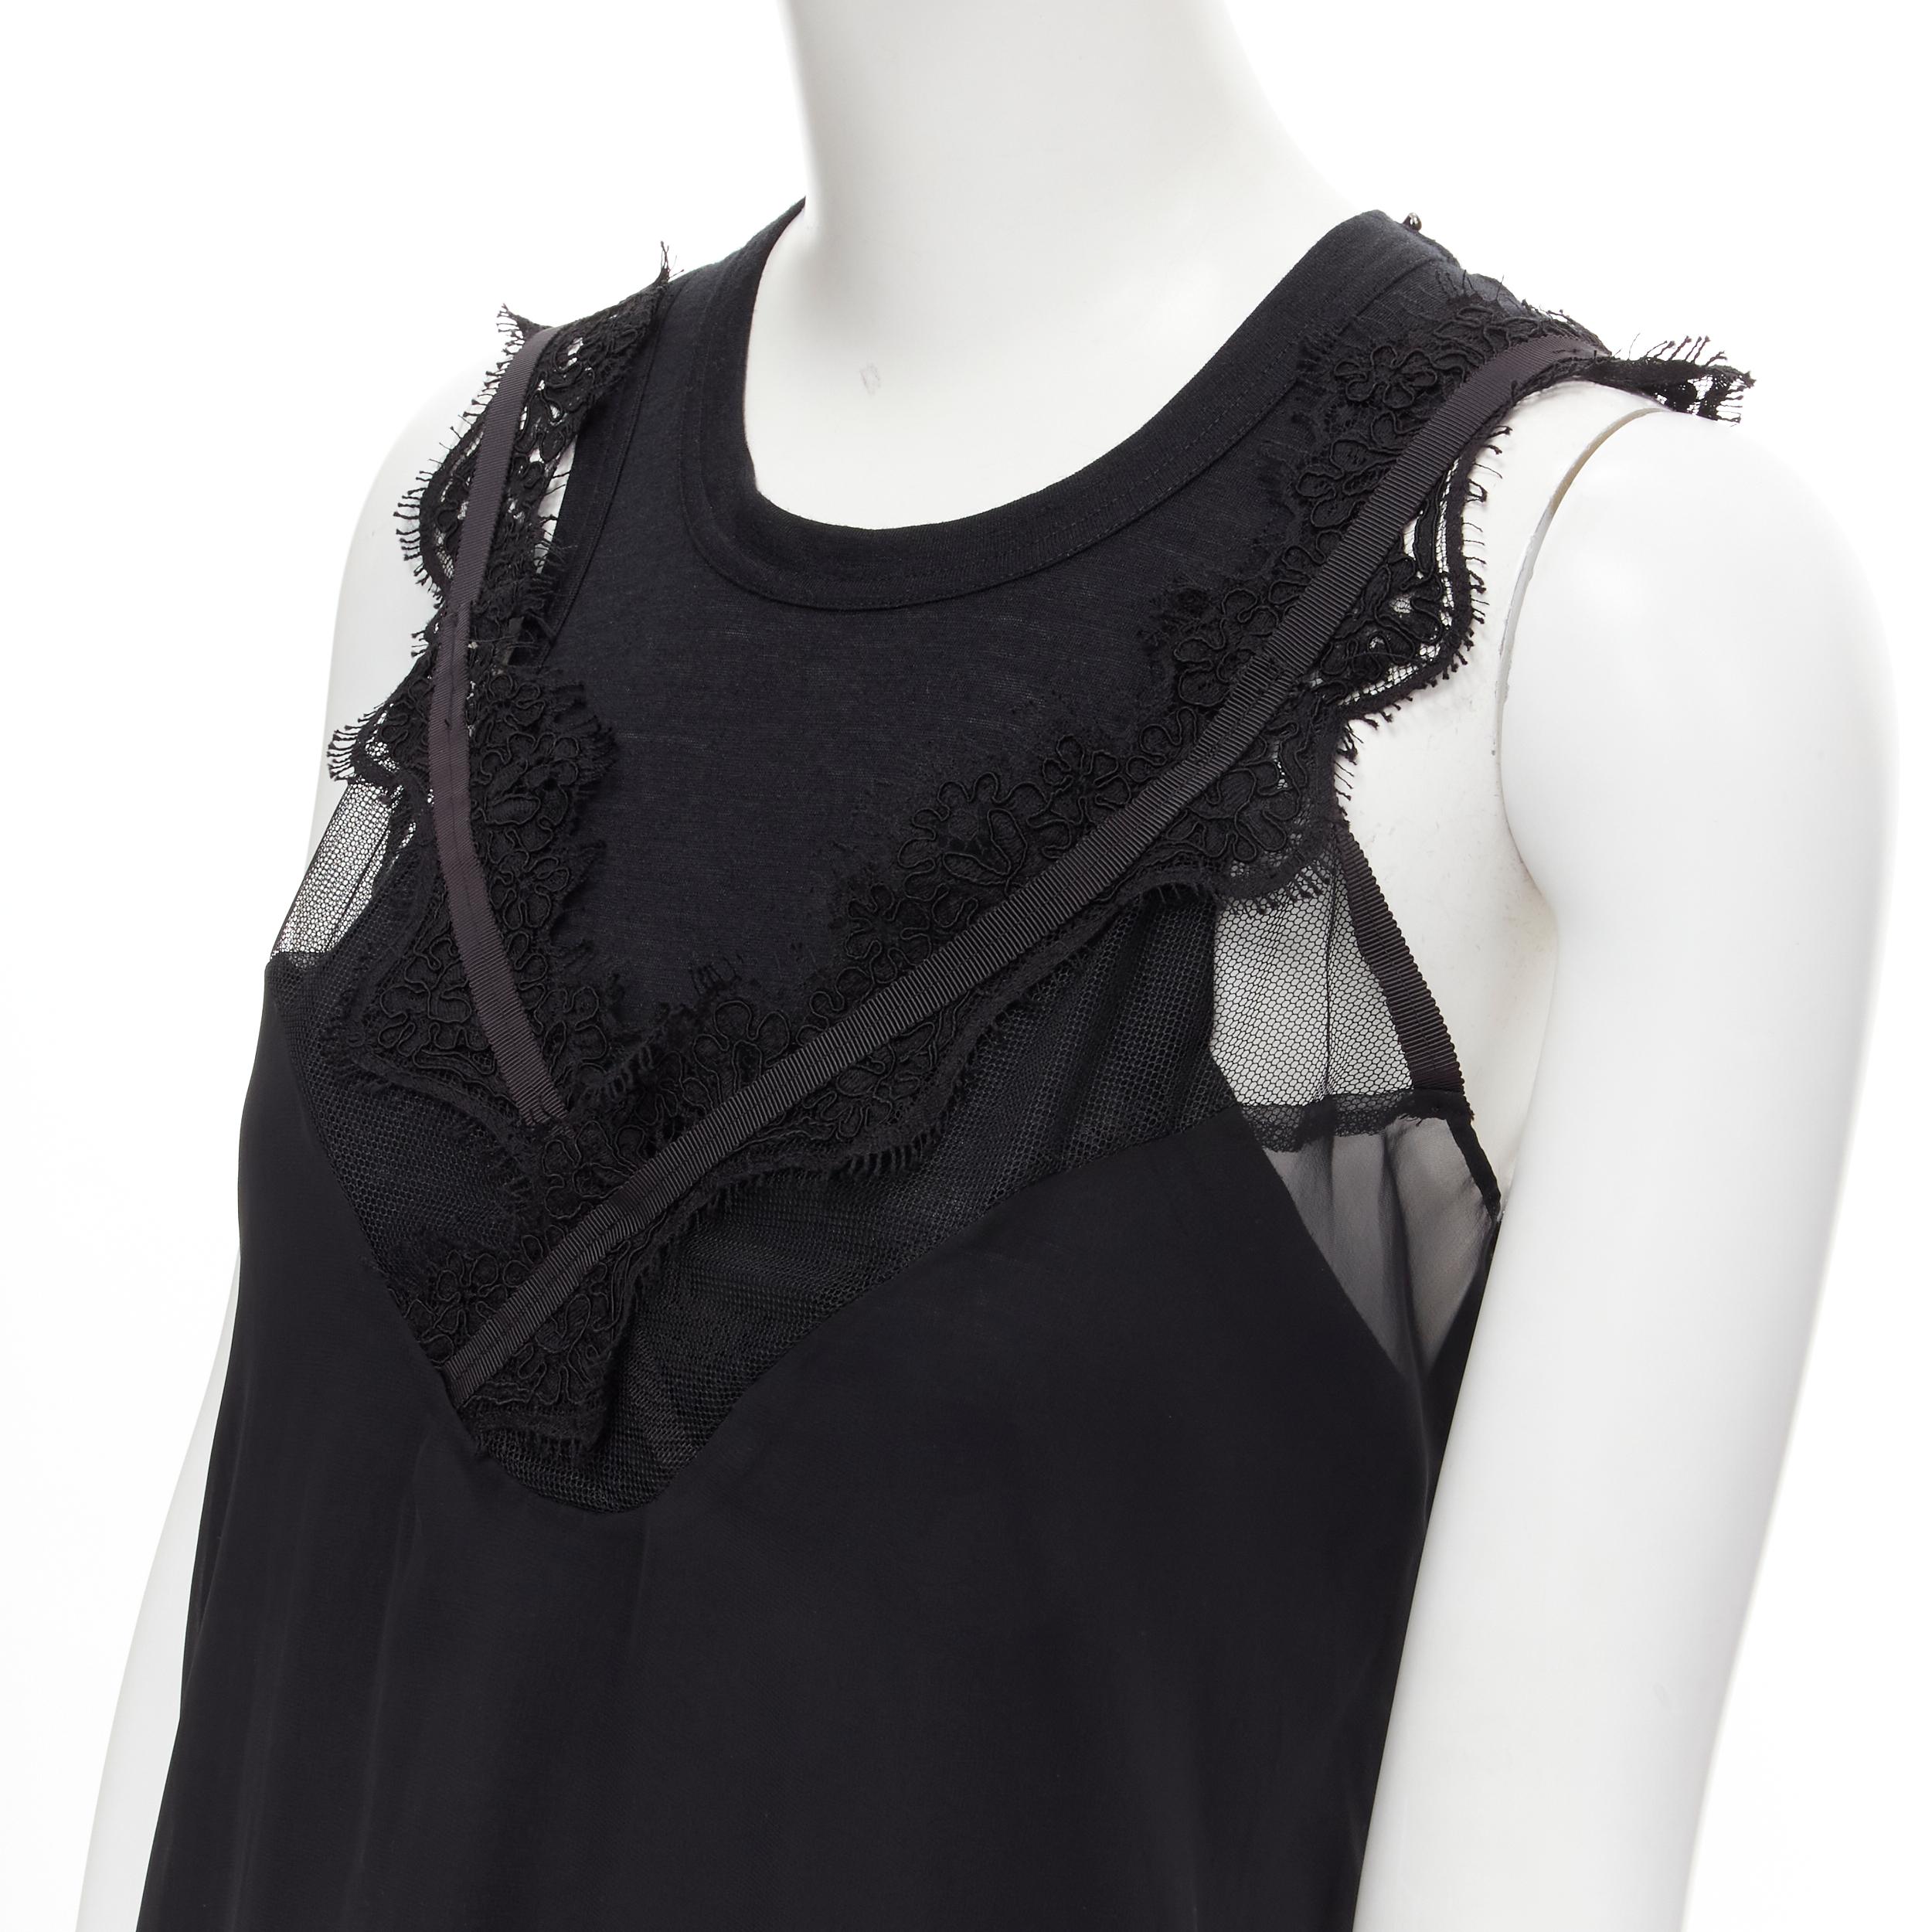 new SACAI black cotton tank layered sheer lace trimmed slip dress JP2 M 
Reference: MELK/A00106 
Brand: Sacai 
Designer: Chitose Abe 
Material: Polyester 
Color: Black 
Pattern: Solid 
Made in: Japan 

CONDITION: 
Condition: New with tags. 
Comes